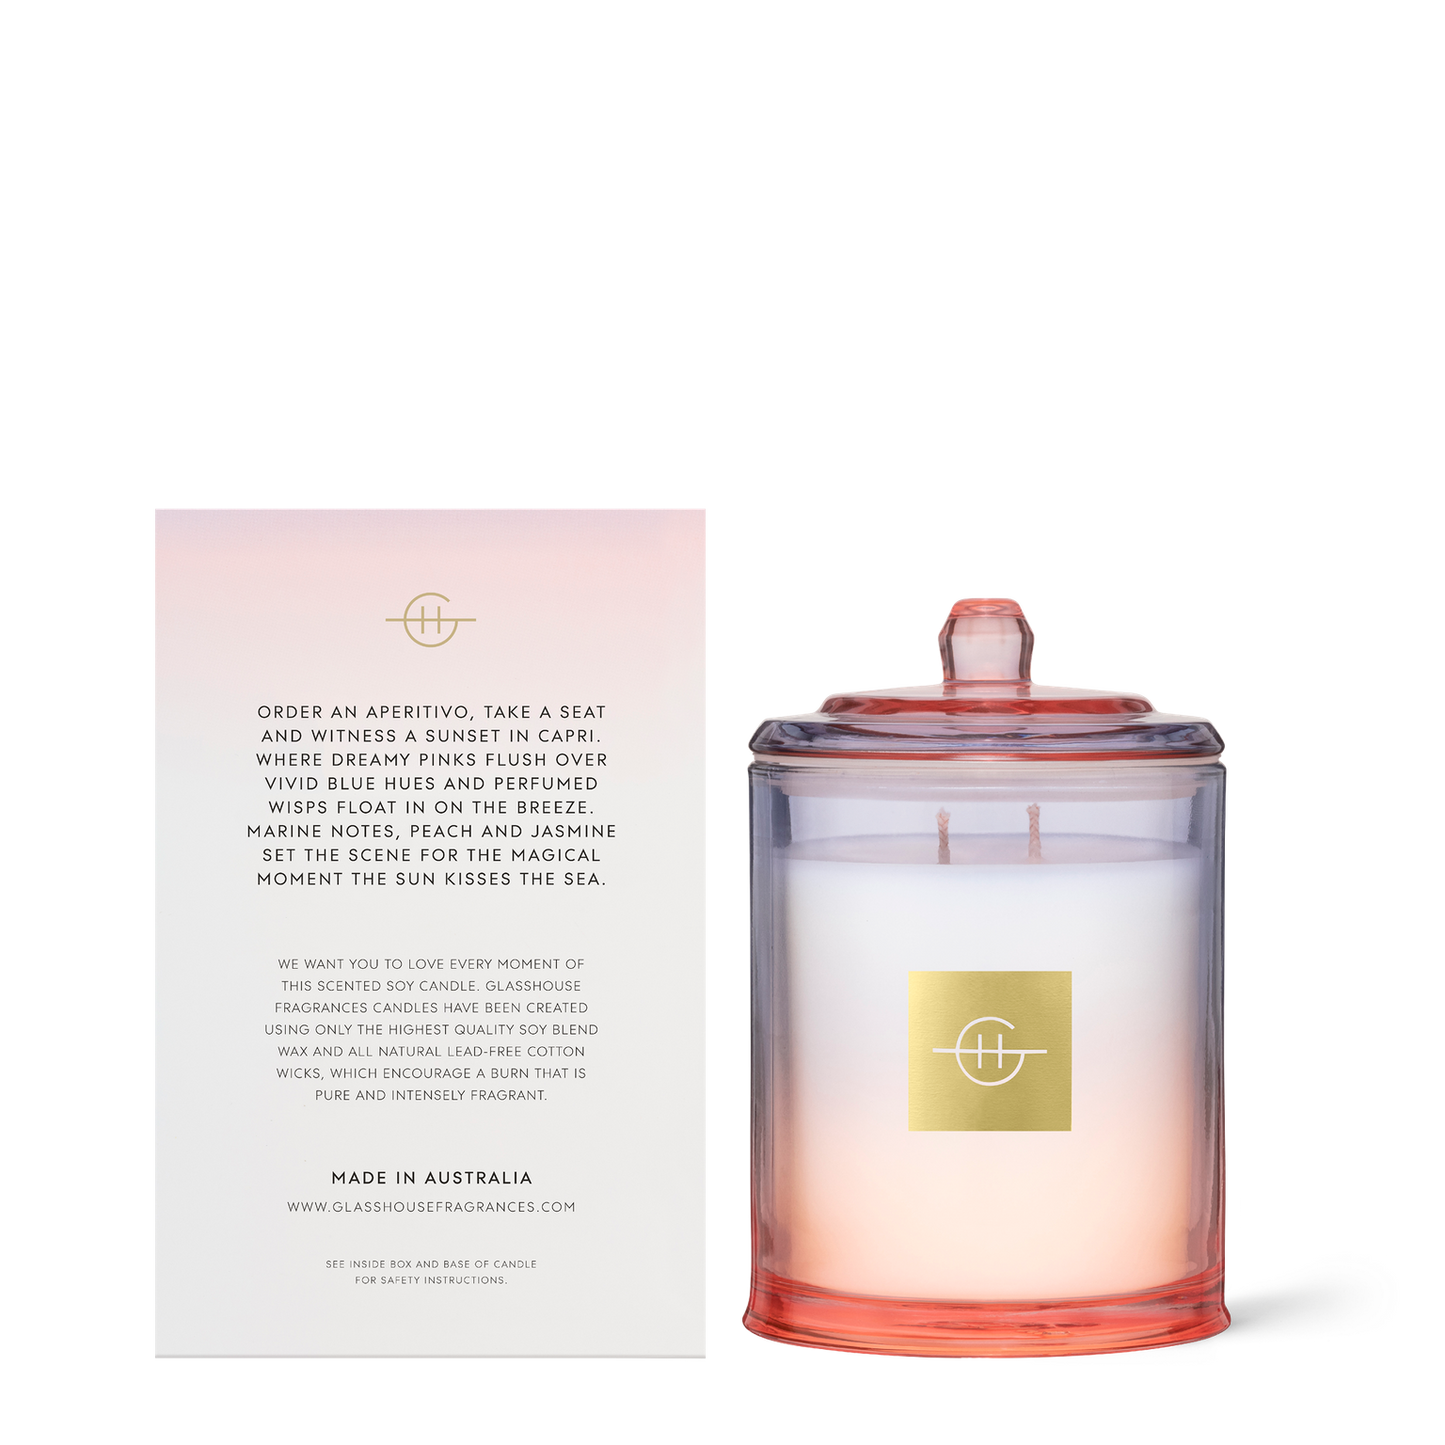 Triple Scented Soy Candle - Sunsets in Capri, Limited Edition